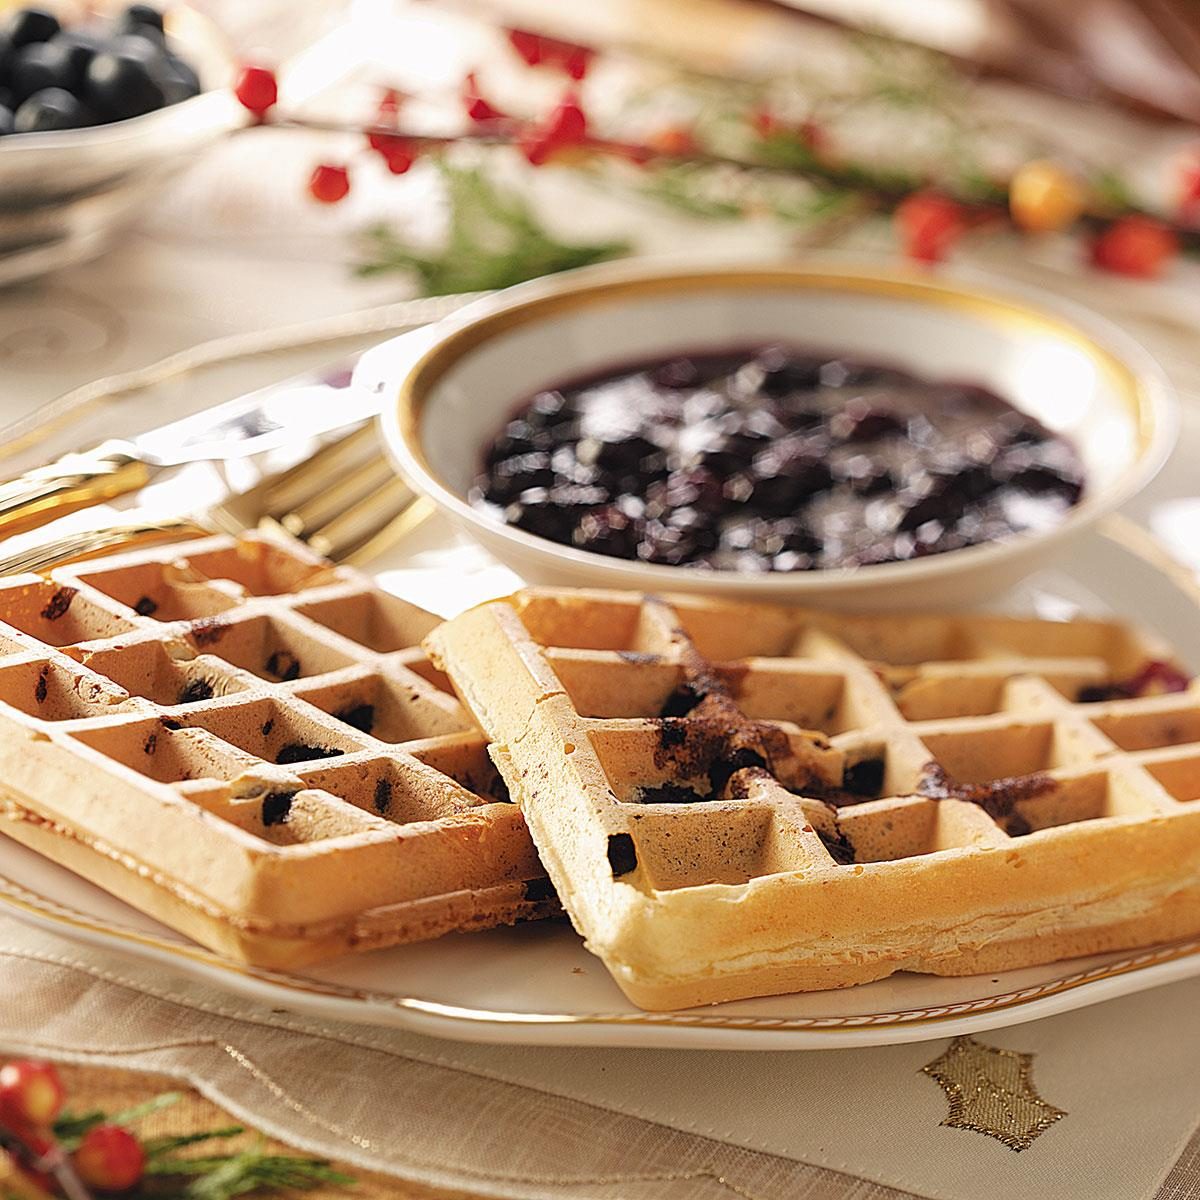 Blueberry Waffles with Blueberry Sauce